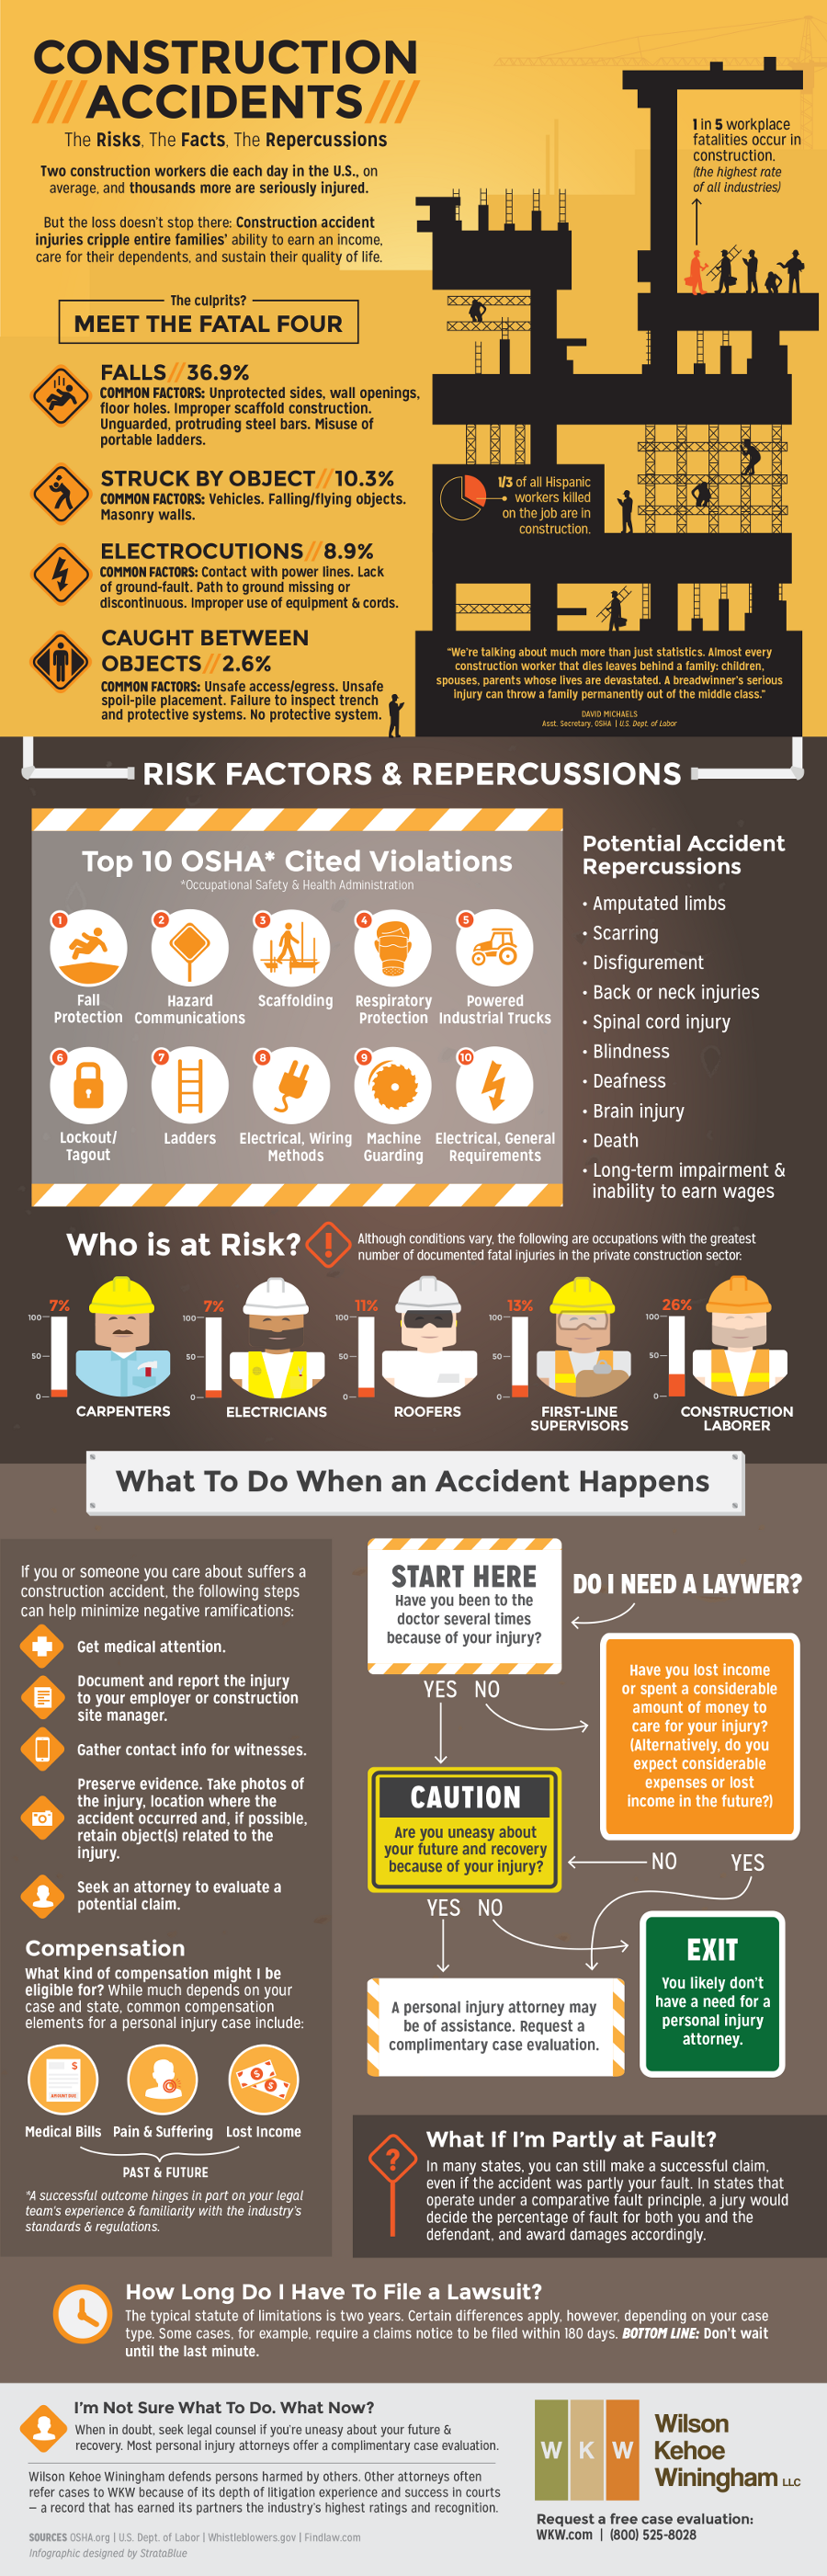 Construction Accidents: The Risks, the Facts, the Repercussions – An Infographic from Wilson Kehoe Winingham